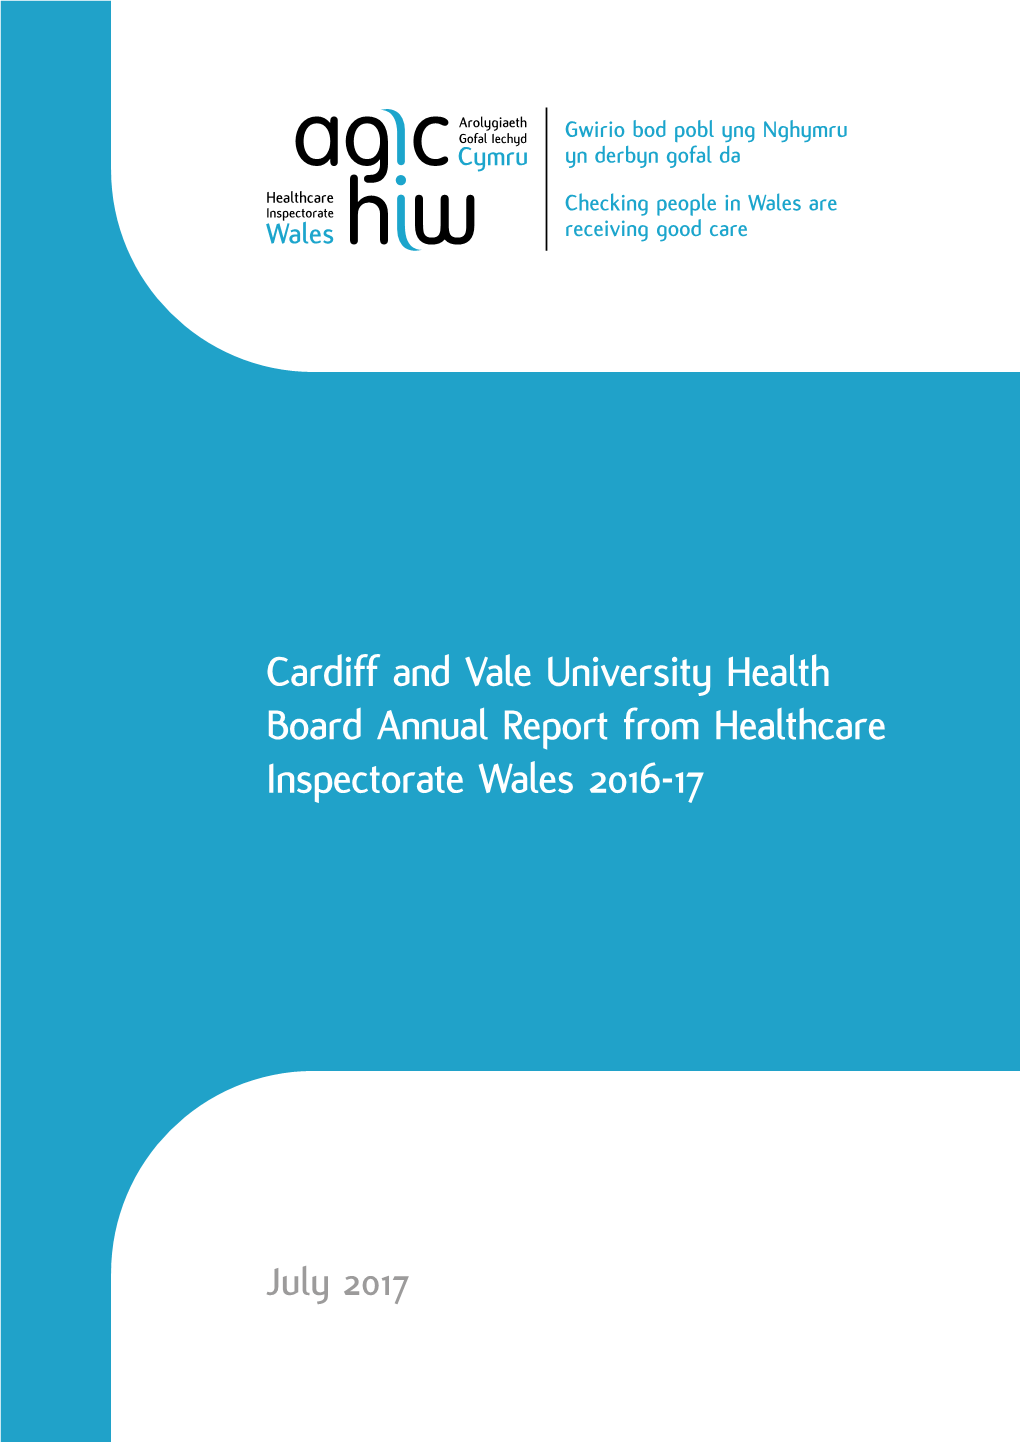 Cardiff and Vale University Health Board Annual Report from Healthcare Inspectorate Wales 2016-17